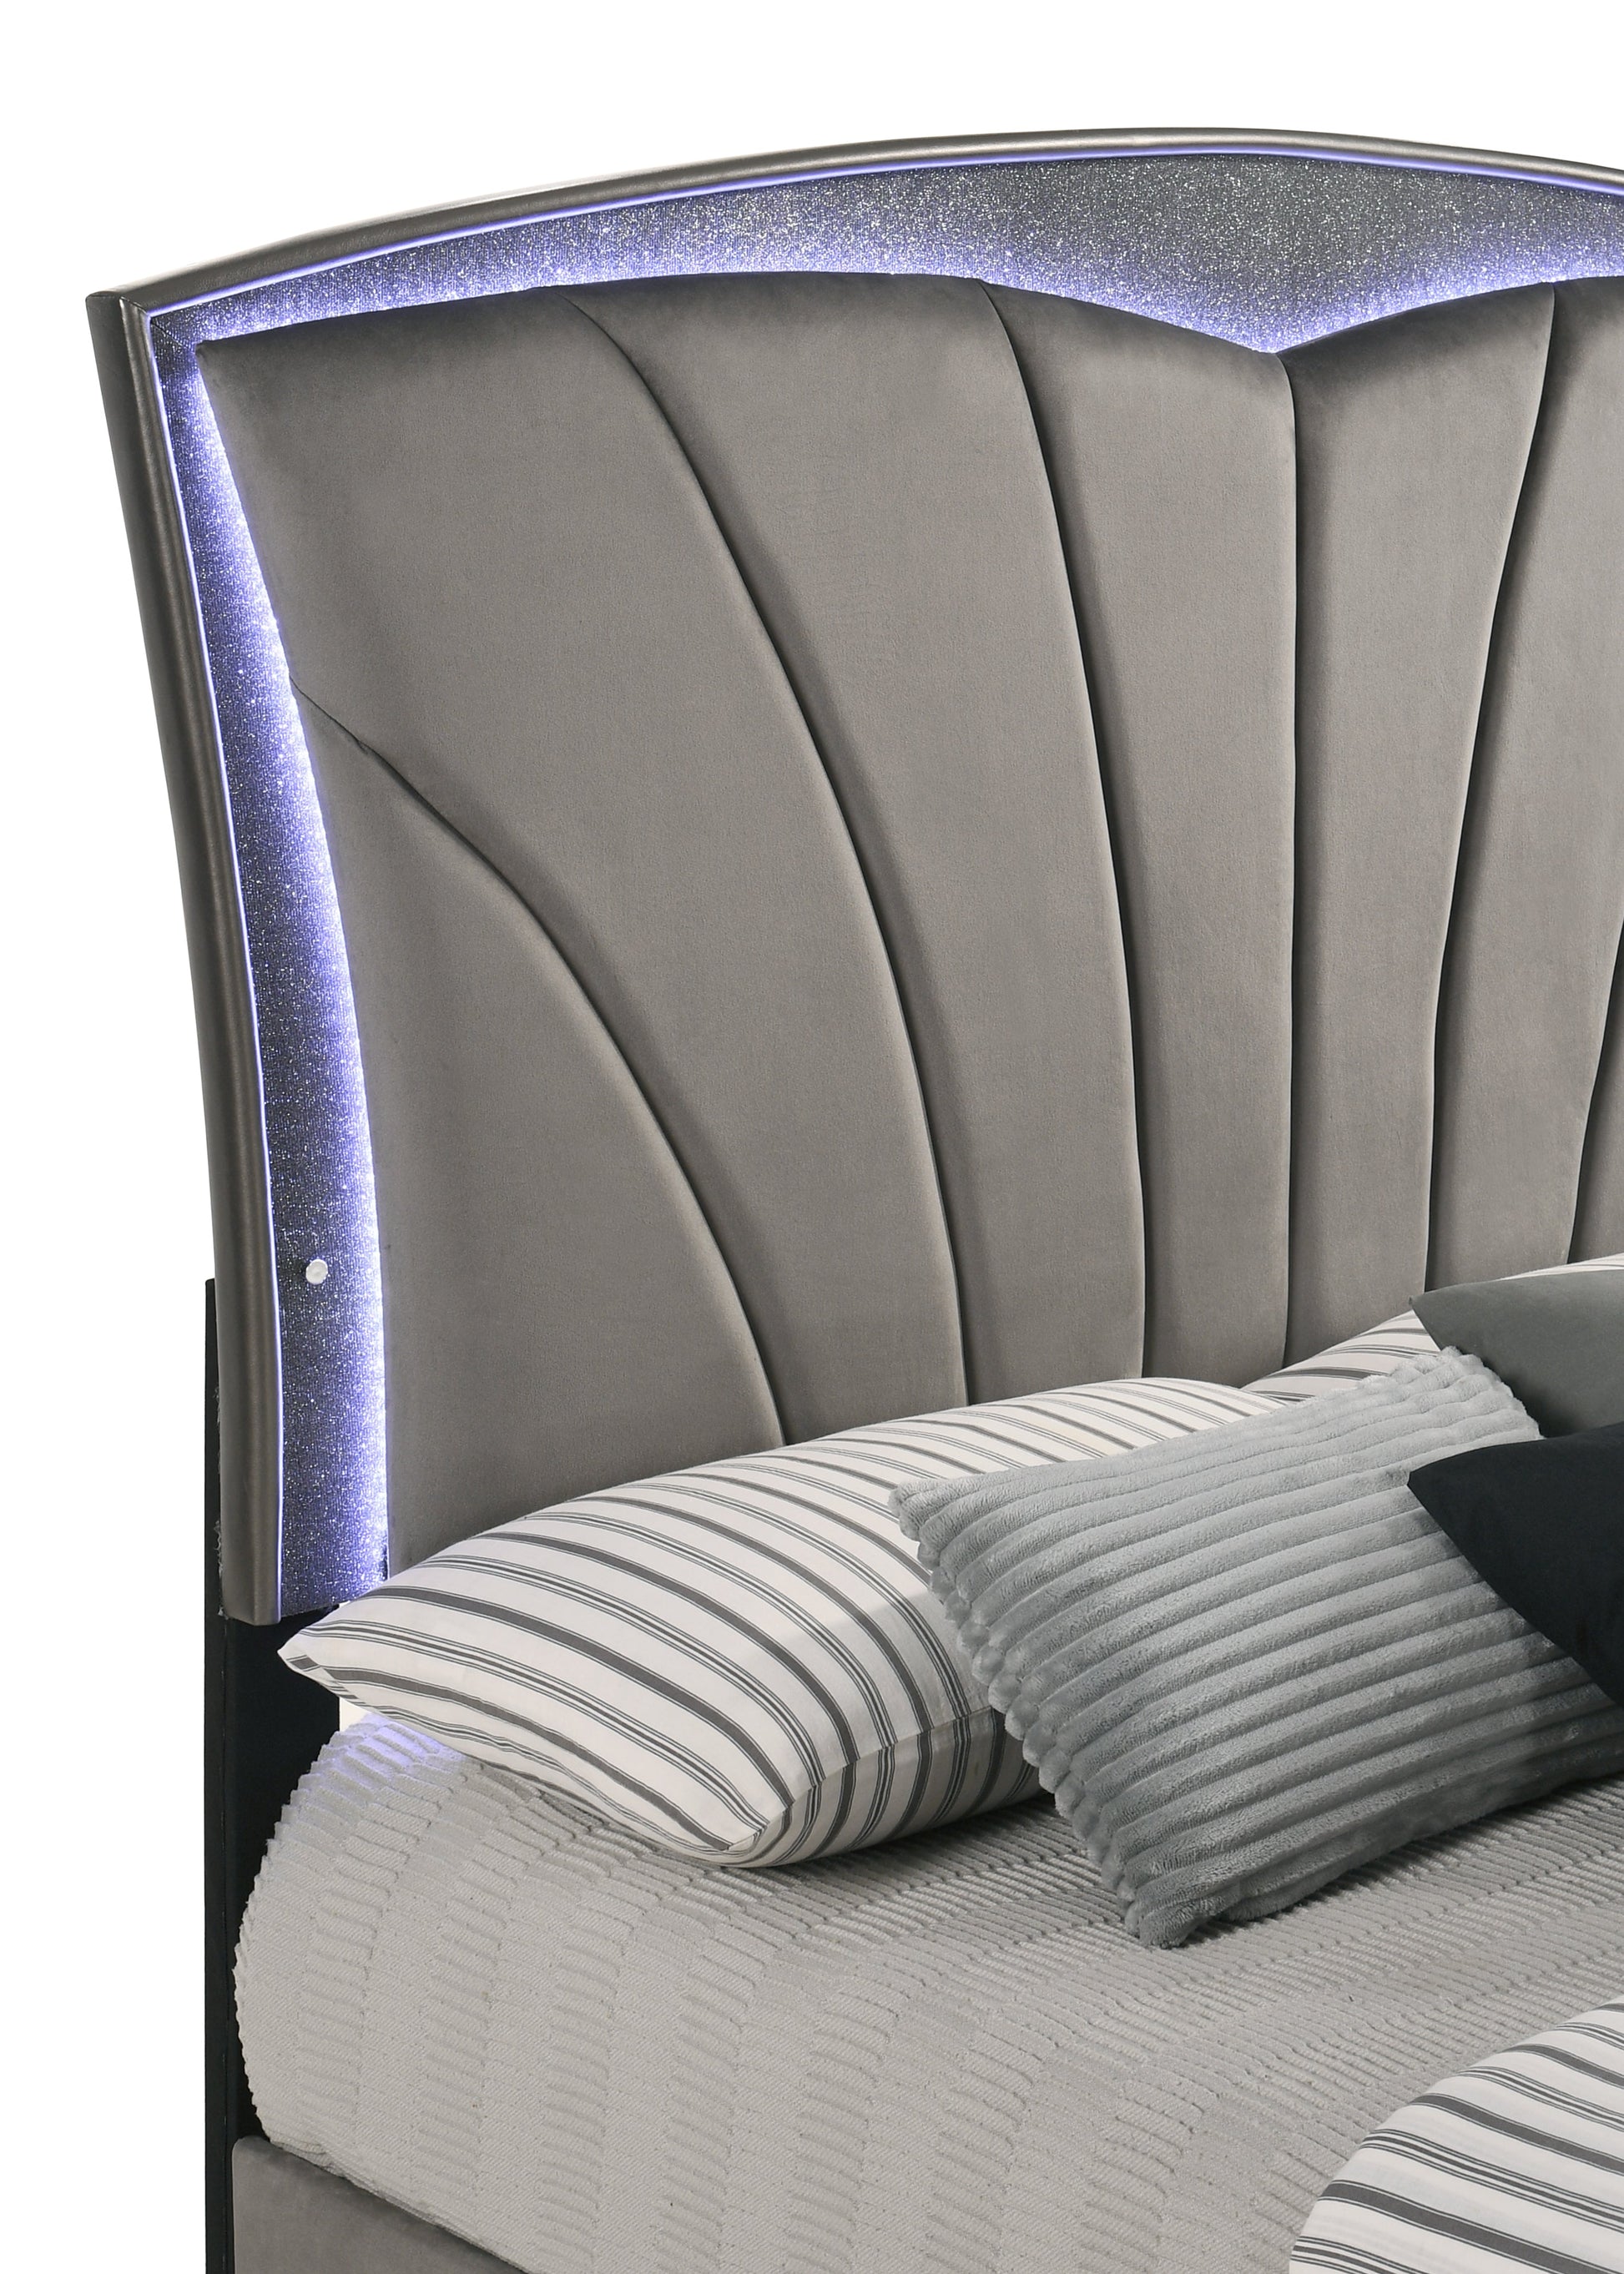 Frampton Gray Exquisite And Modern LED Fabric Upholstered Panel Bedroom Set